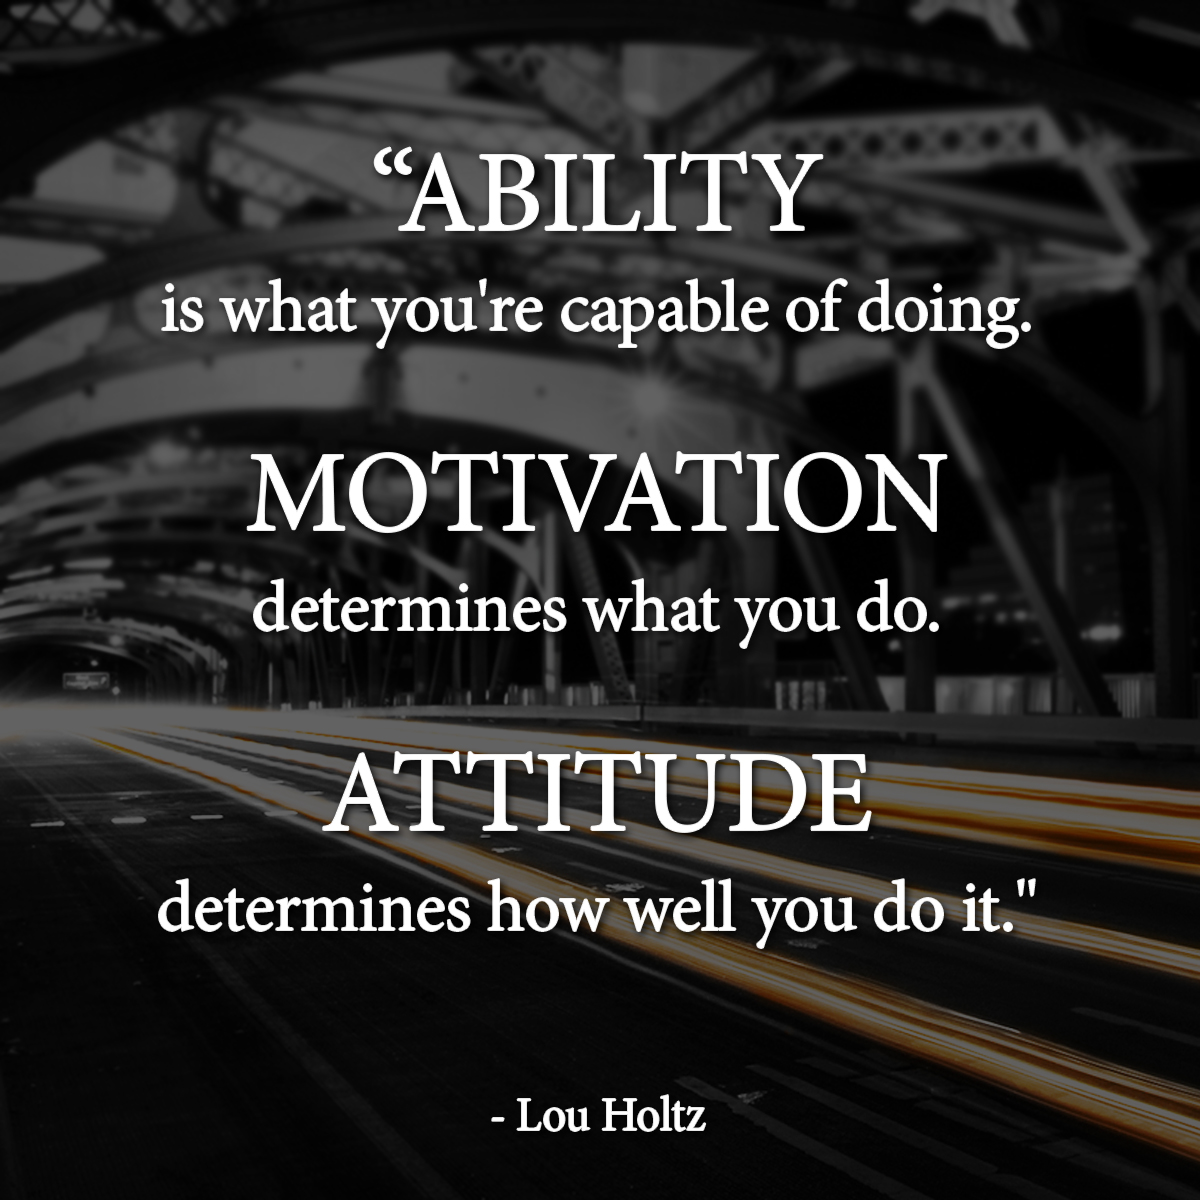 Ability is what you’re capable of doing. Motivation determines what you do. Attitude determines how well you do it. Lou Holtz